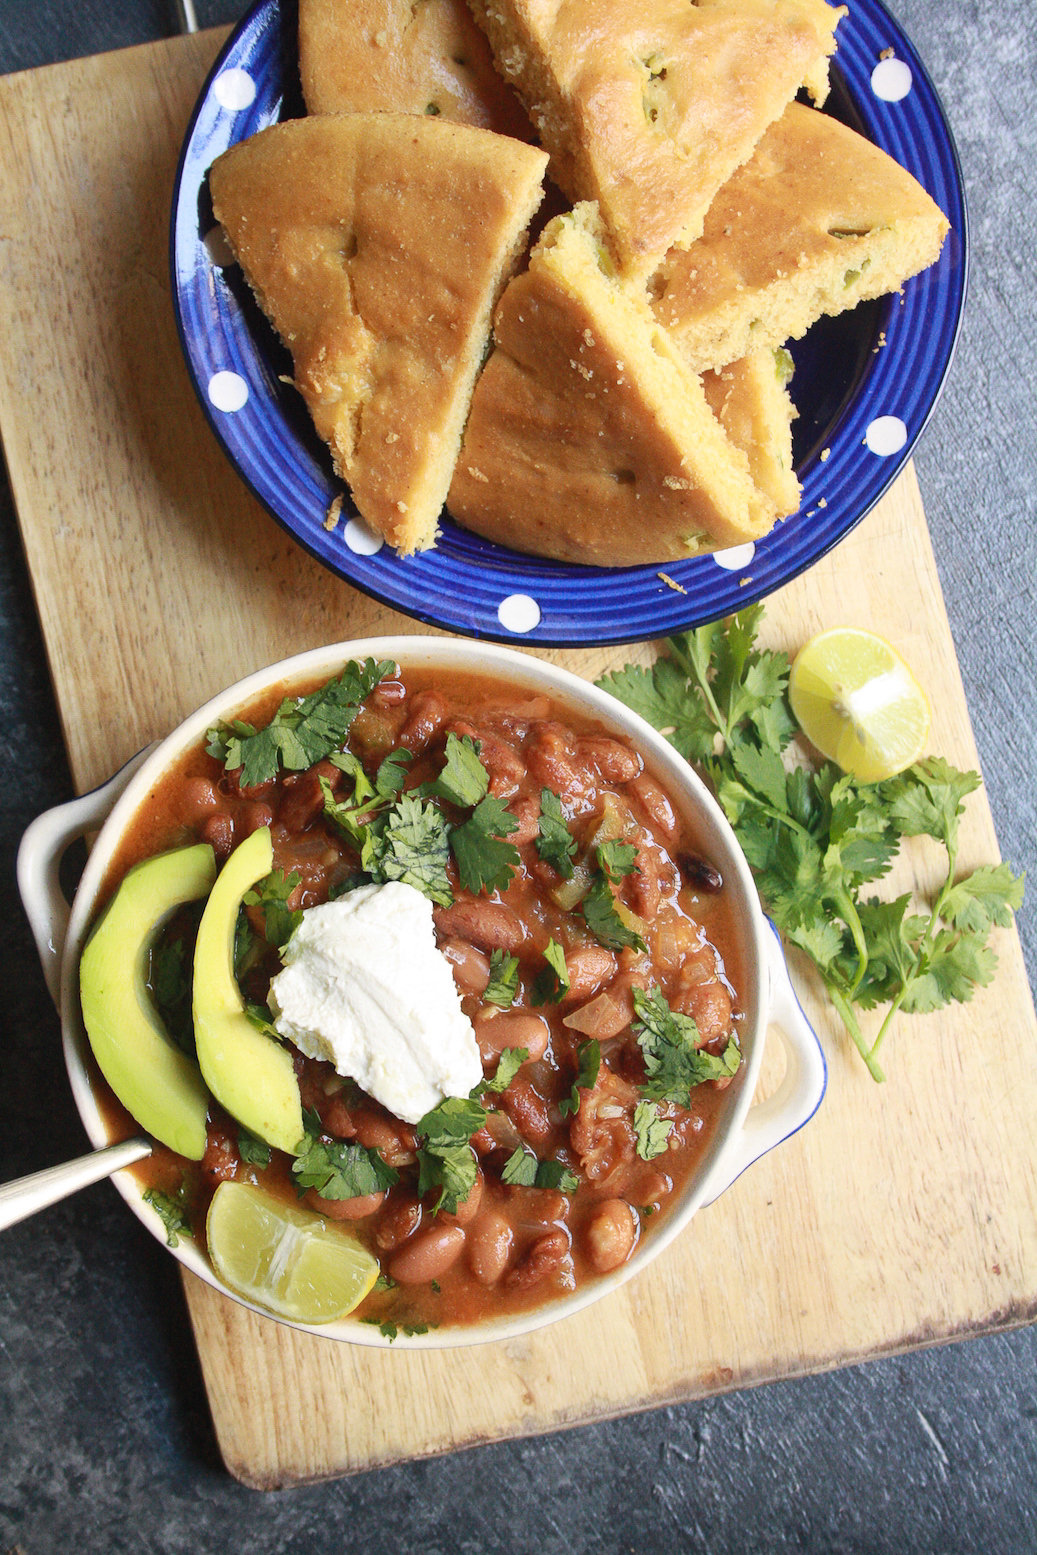 A hearty vegetarian chili with beans and veggies plus eggless, tender cornbread to go with it. Easily made vegan too!